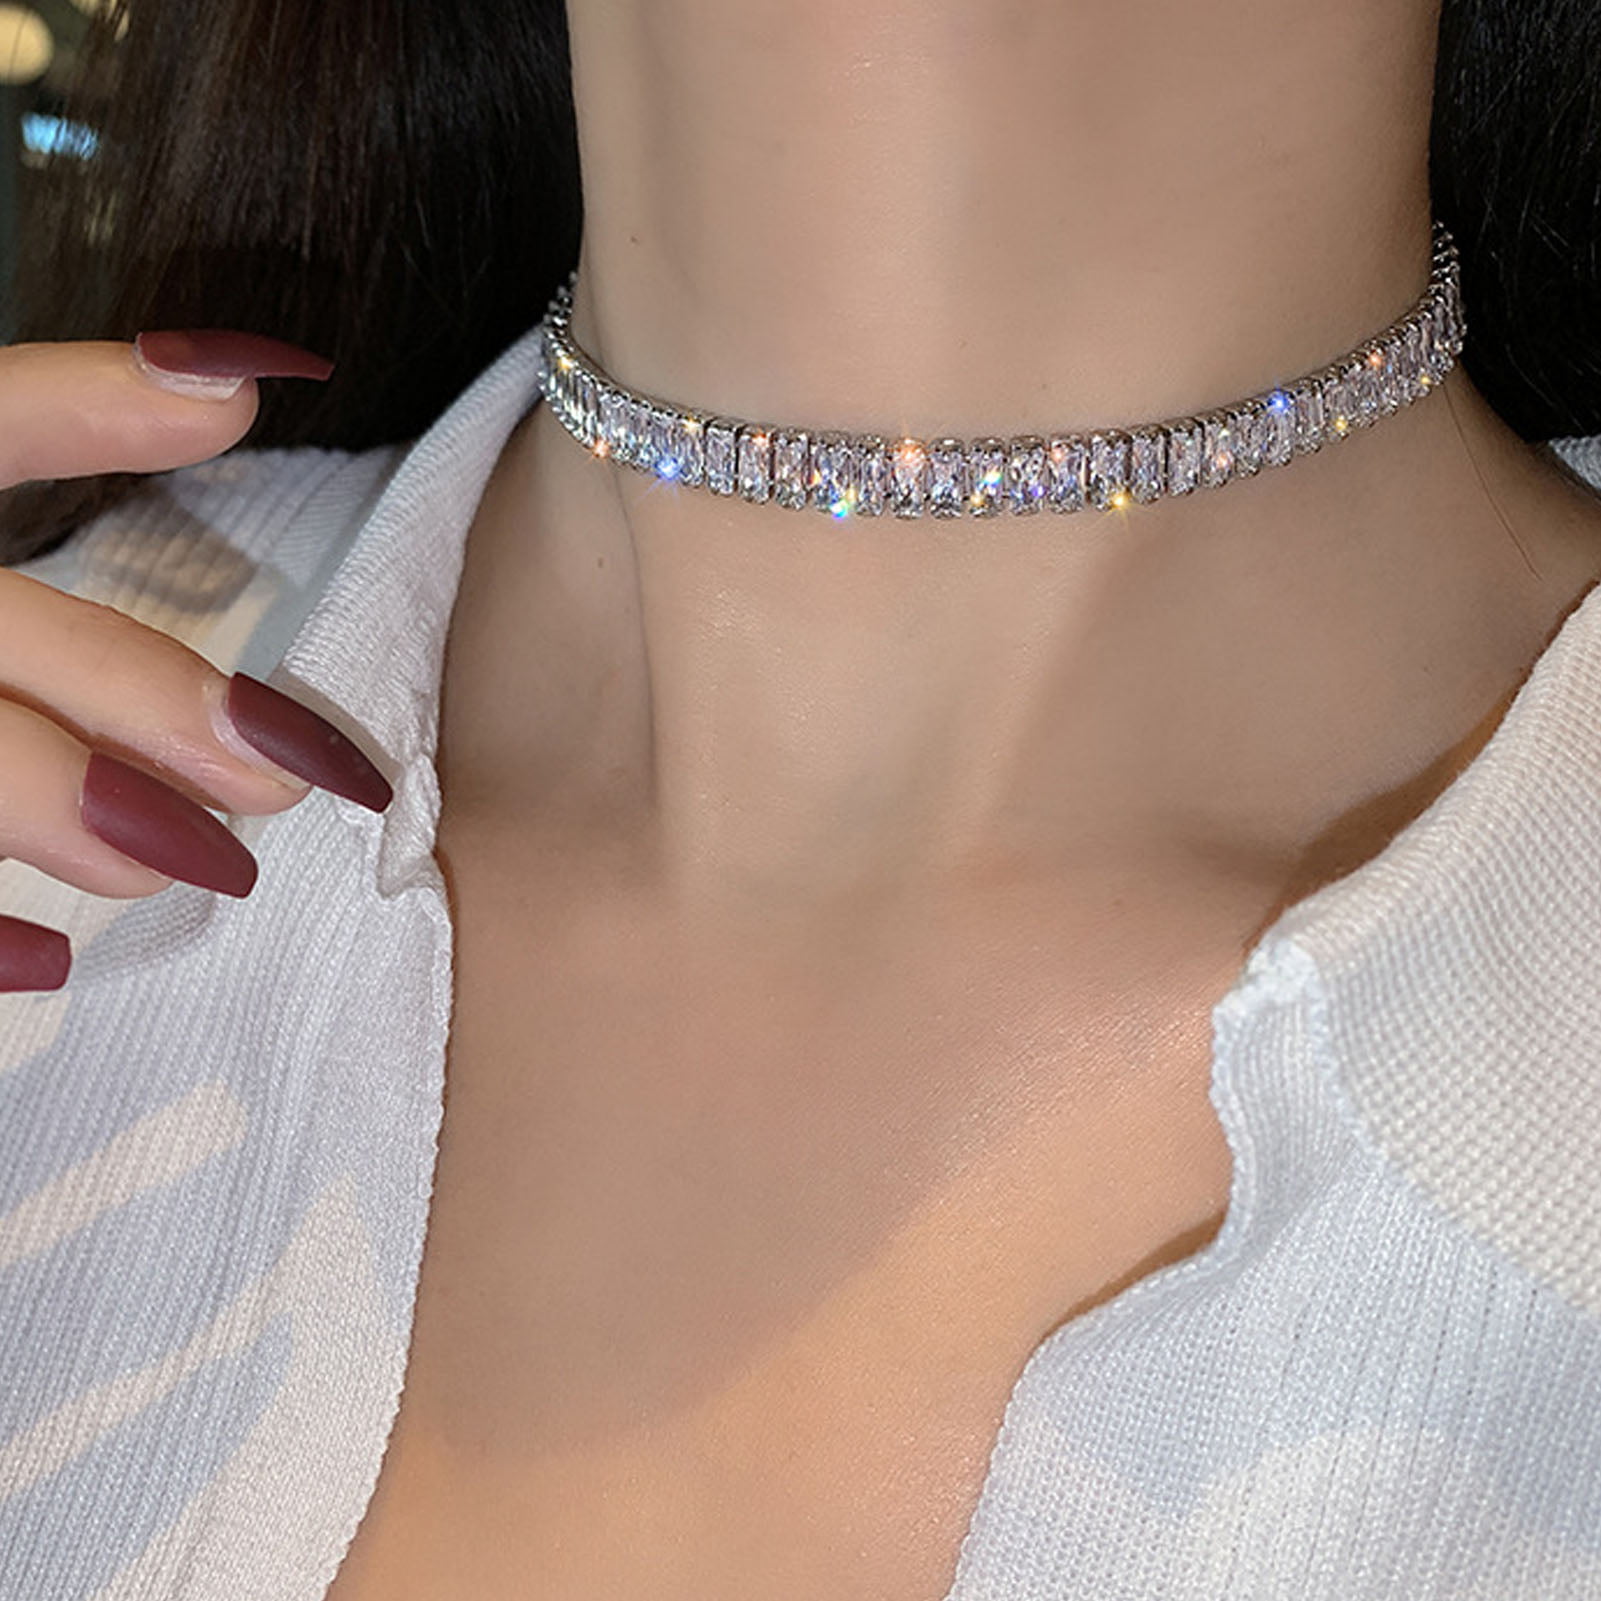 New Obsession Choker Set - Silver/Green